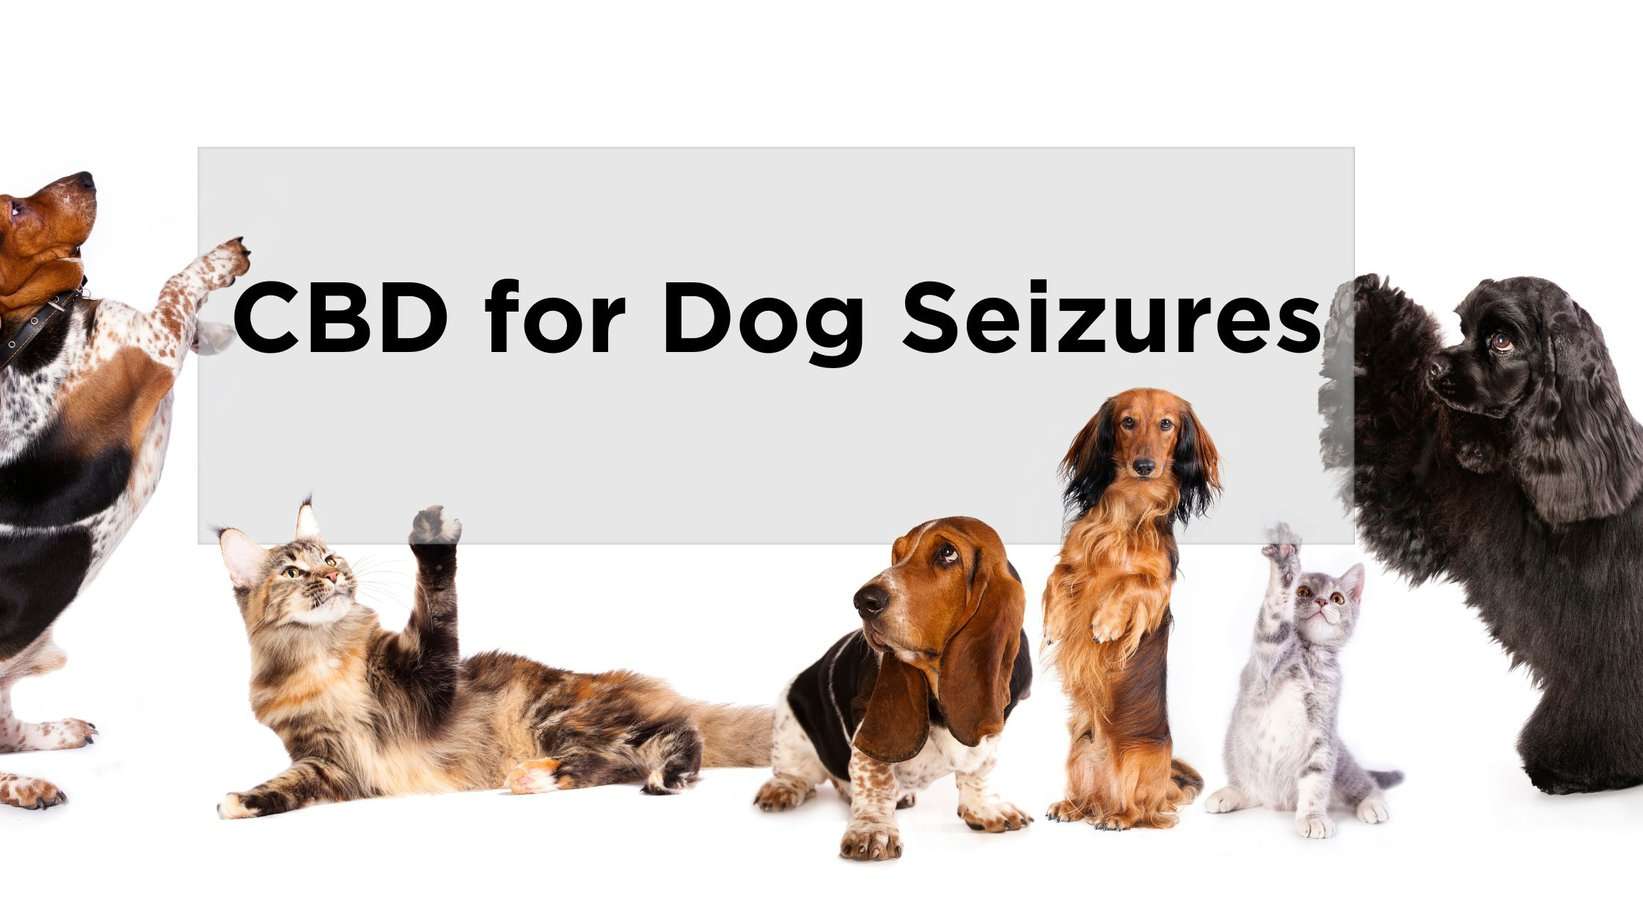 Various dog breeds gathered under a banner that reads "CBD for Dog Seizures" in bold letters.